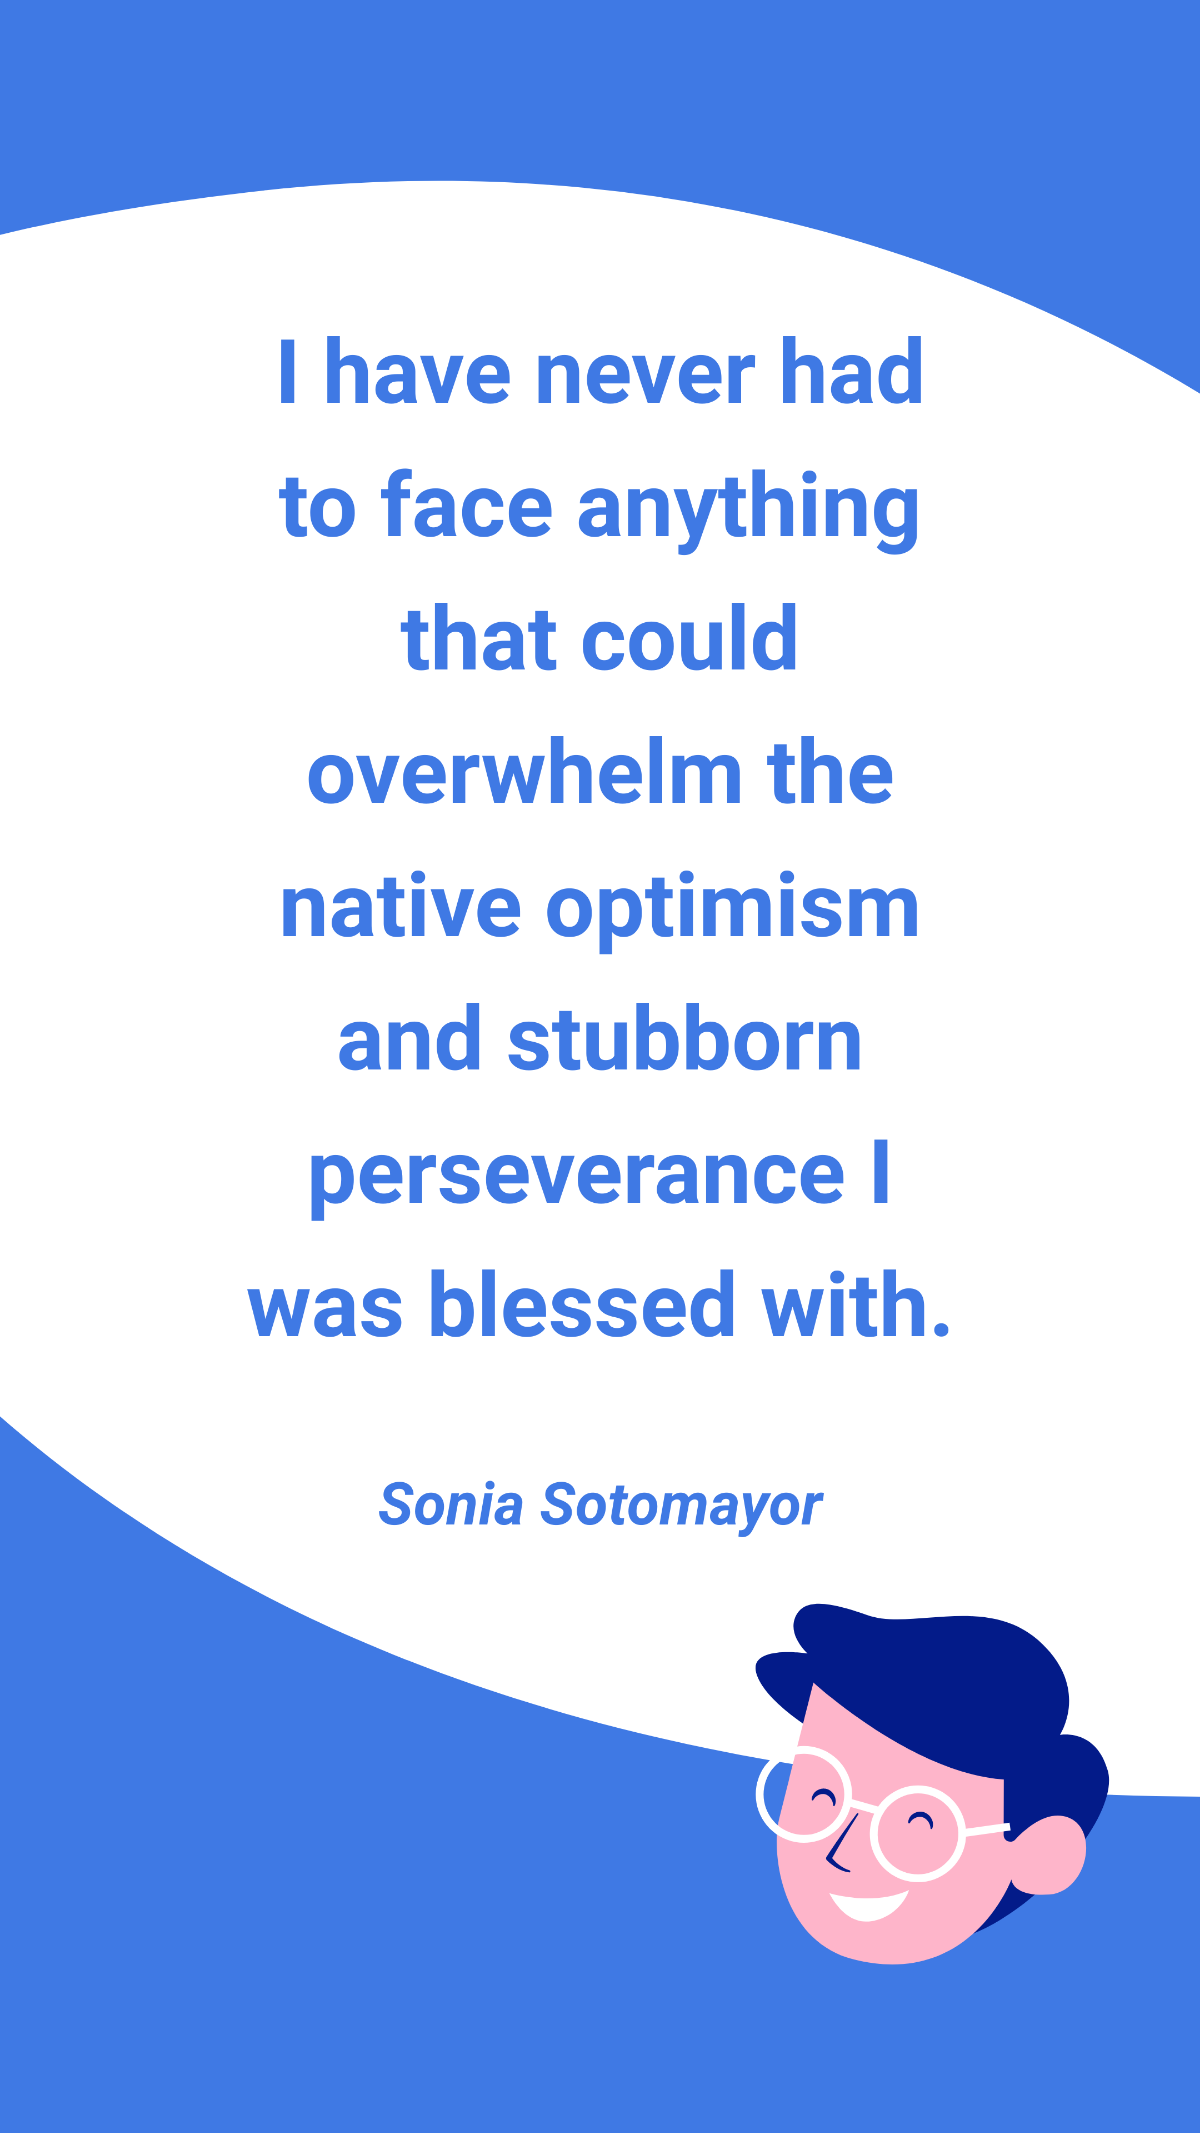 Free Sonia Sotomayor - I have never had to face anything that could overwhelm the native optimism and stubborn perseverance I was blessed with. Template